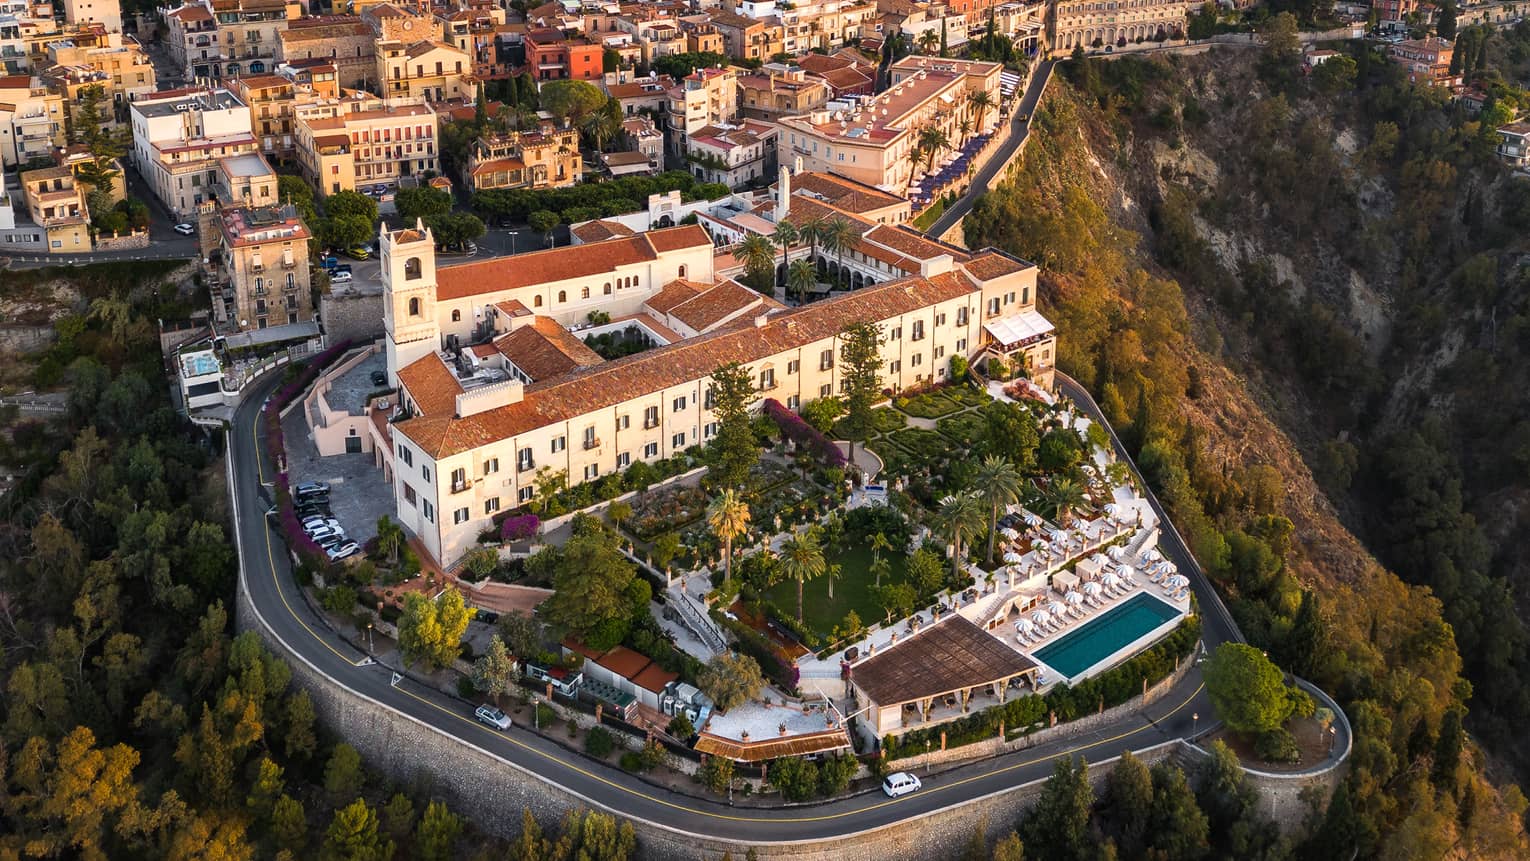 An Aerial view of a large property on a hill or cliffside.